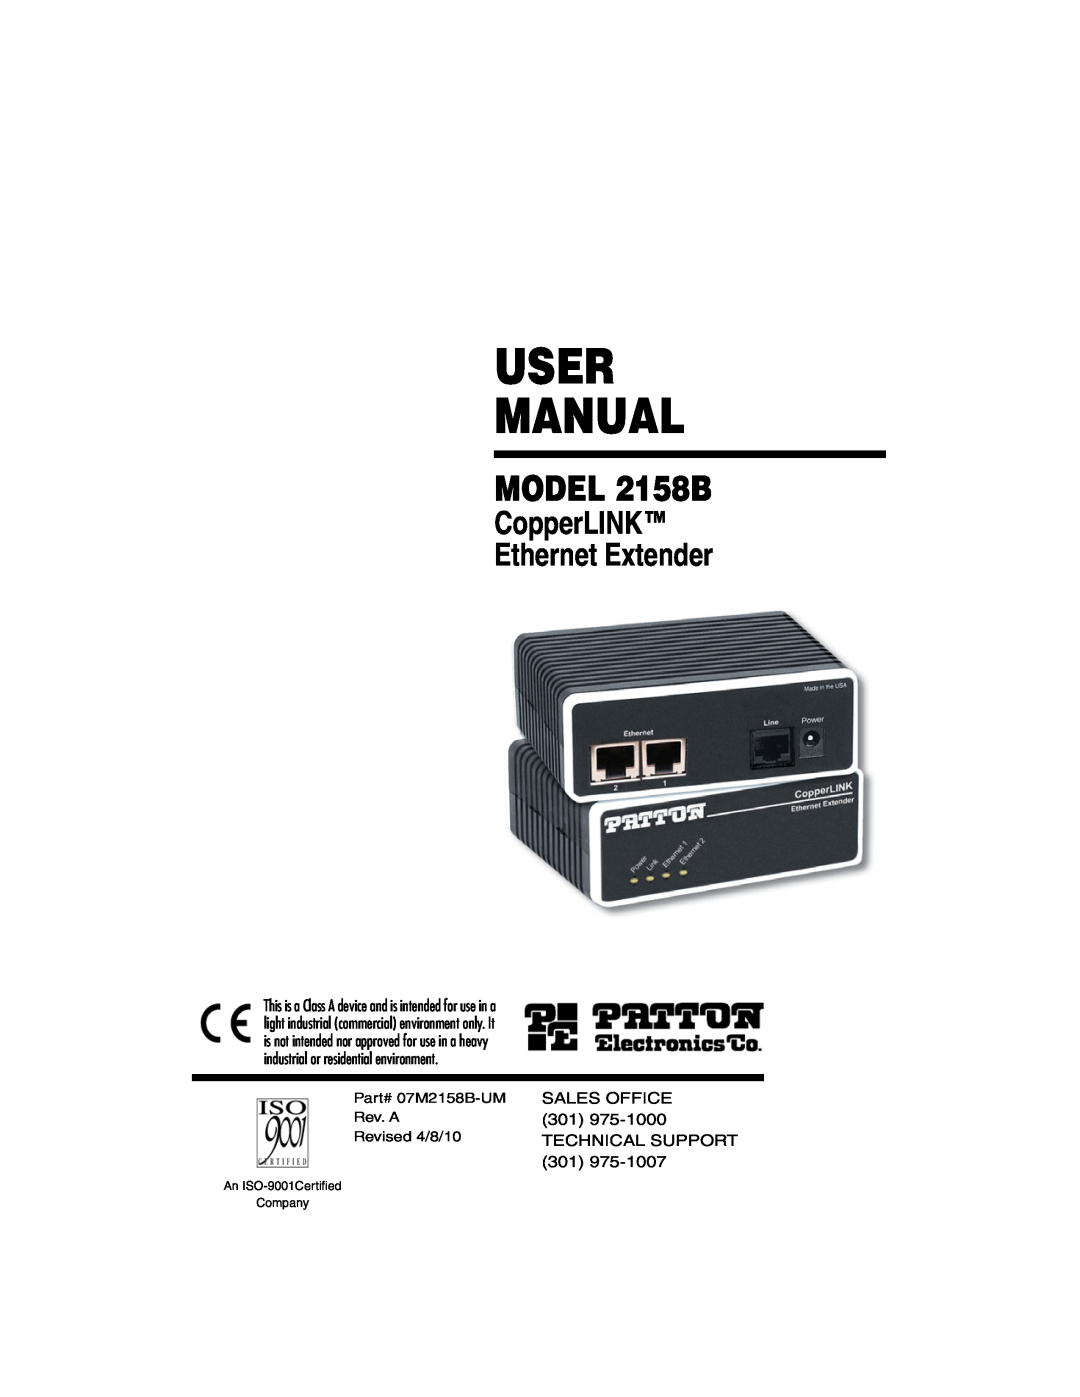 Patton electronic user manual User Manual, MODEL 2158B, CopperLINK Ethernet Extender, An ISO-9001Certiﬁed Company 